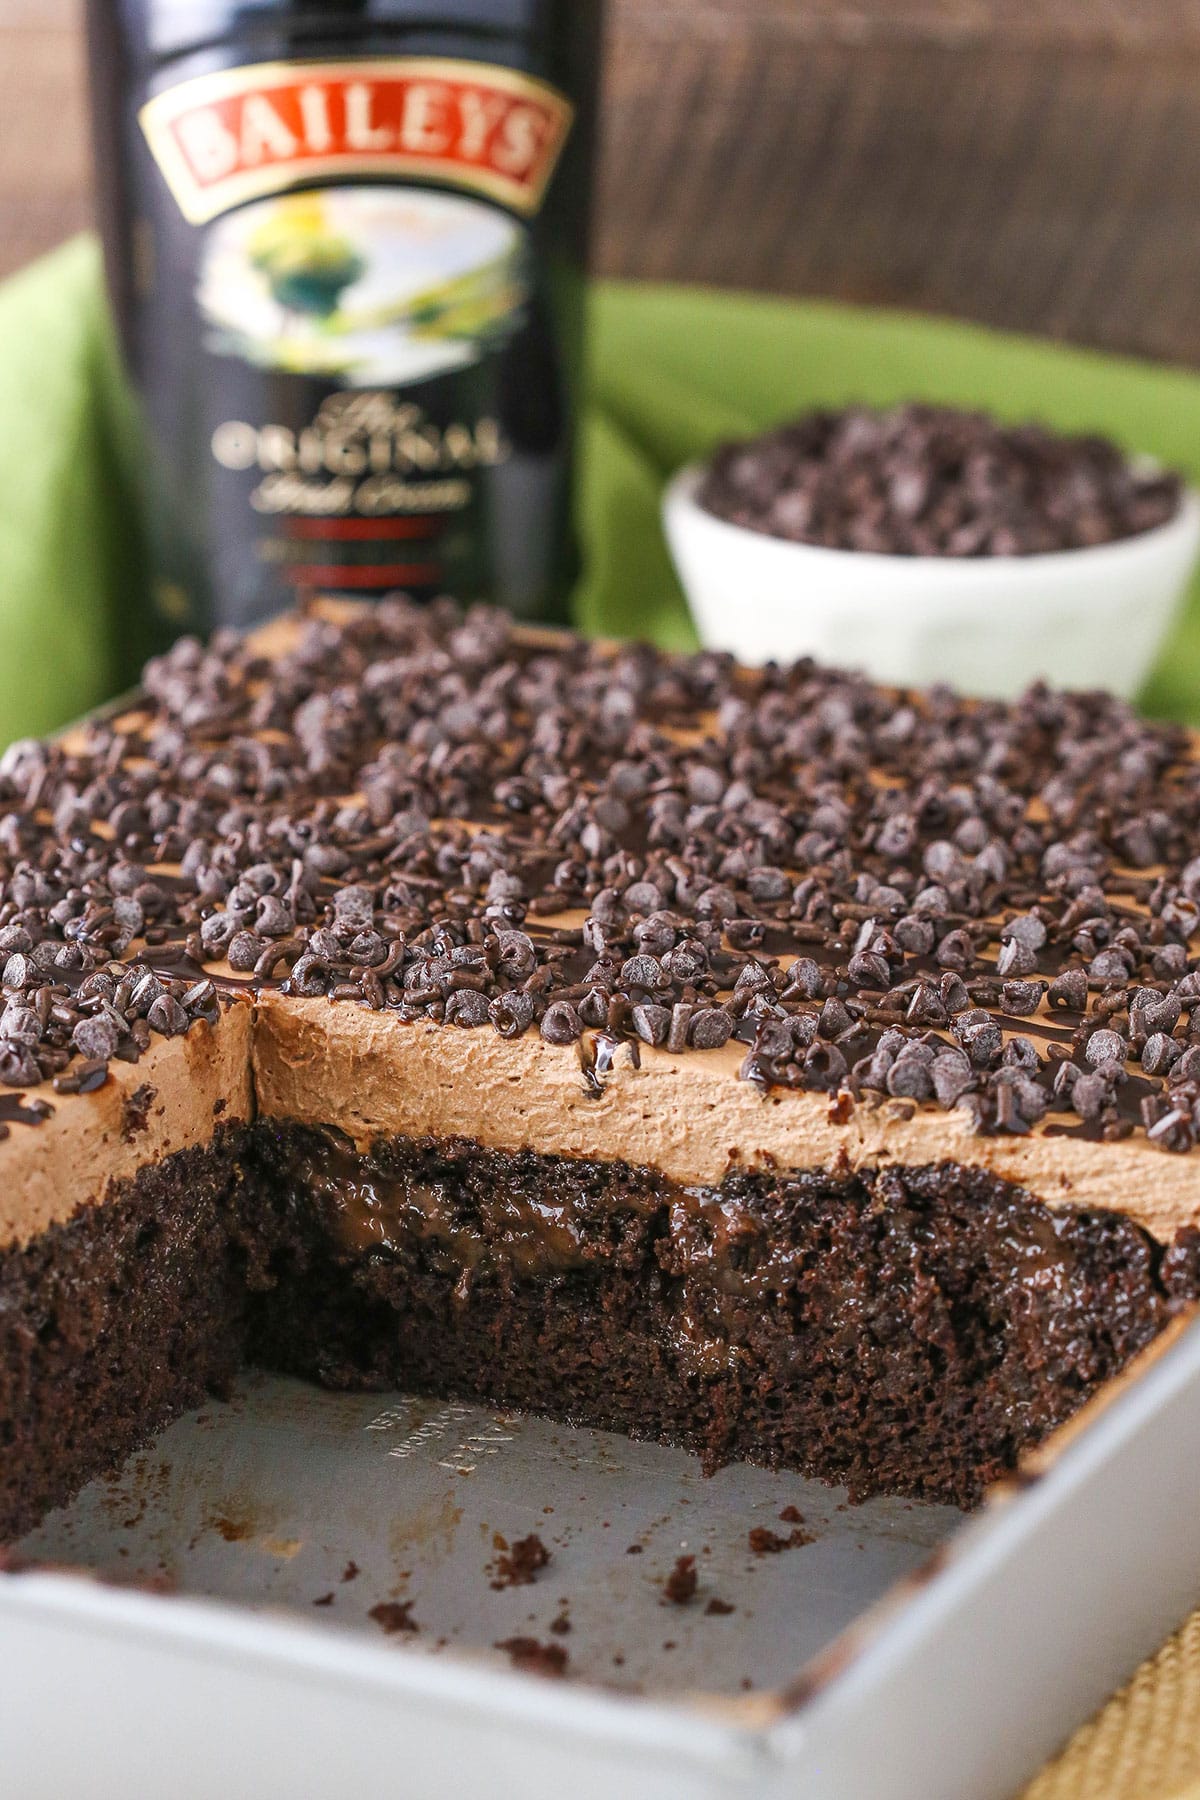 Baileys Chocolate Poke Cake topped with chocolate chips and a bottle of Baileys in the background